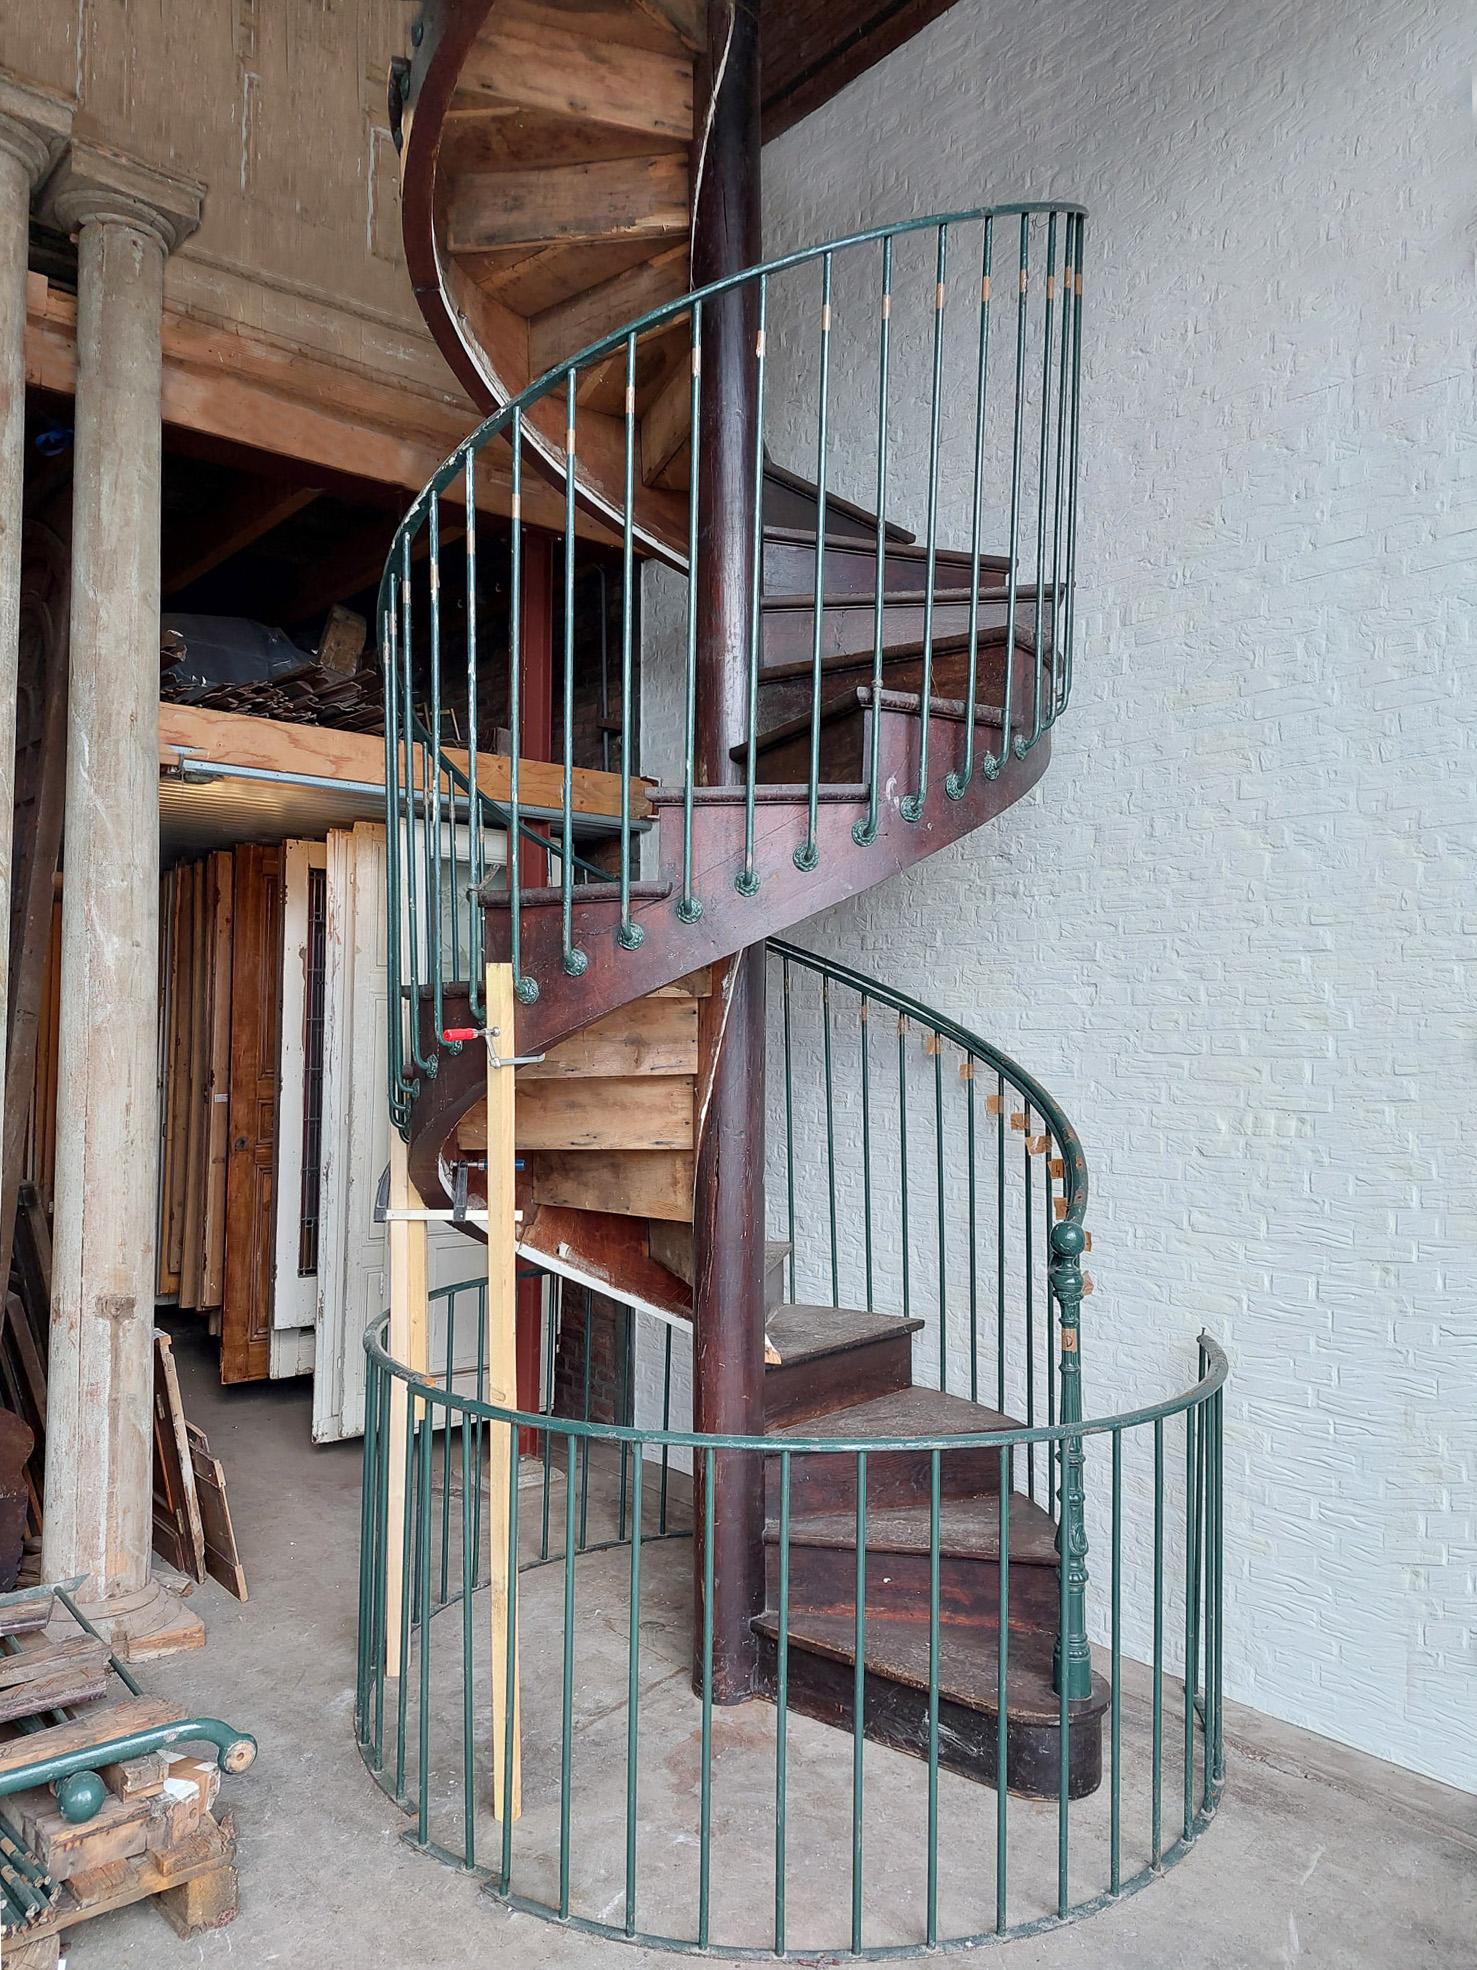 A monumental, completely free-standing, dark oak spiral staircase. The central newel of this very large spiral staircase consists of an entire solid oak tree trunk, which is made into a strong pole with a diameter of 30 cm. Because of this, the